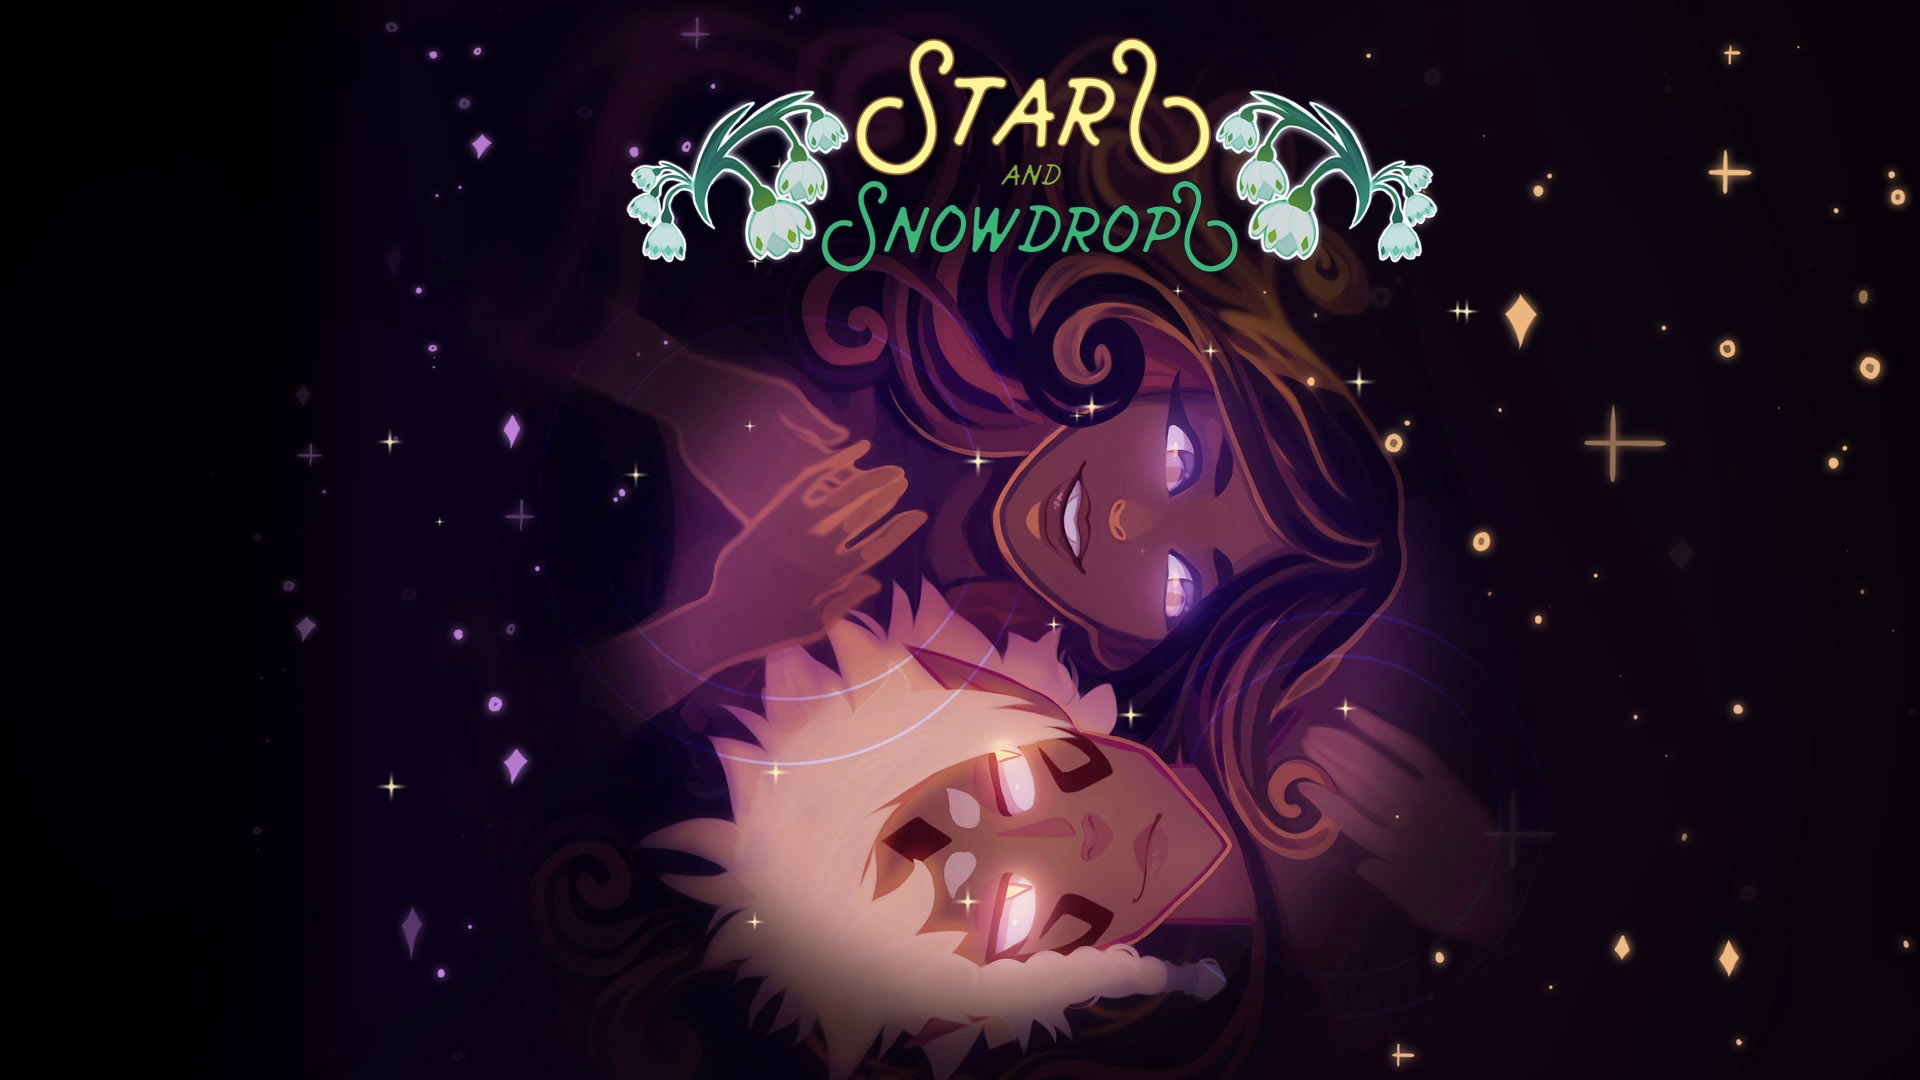 Stars and Snowdrops